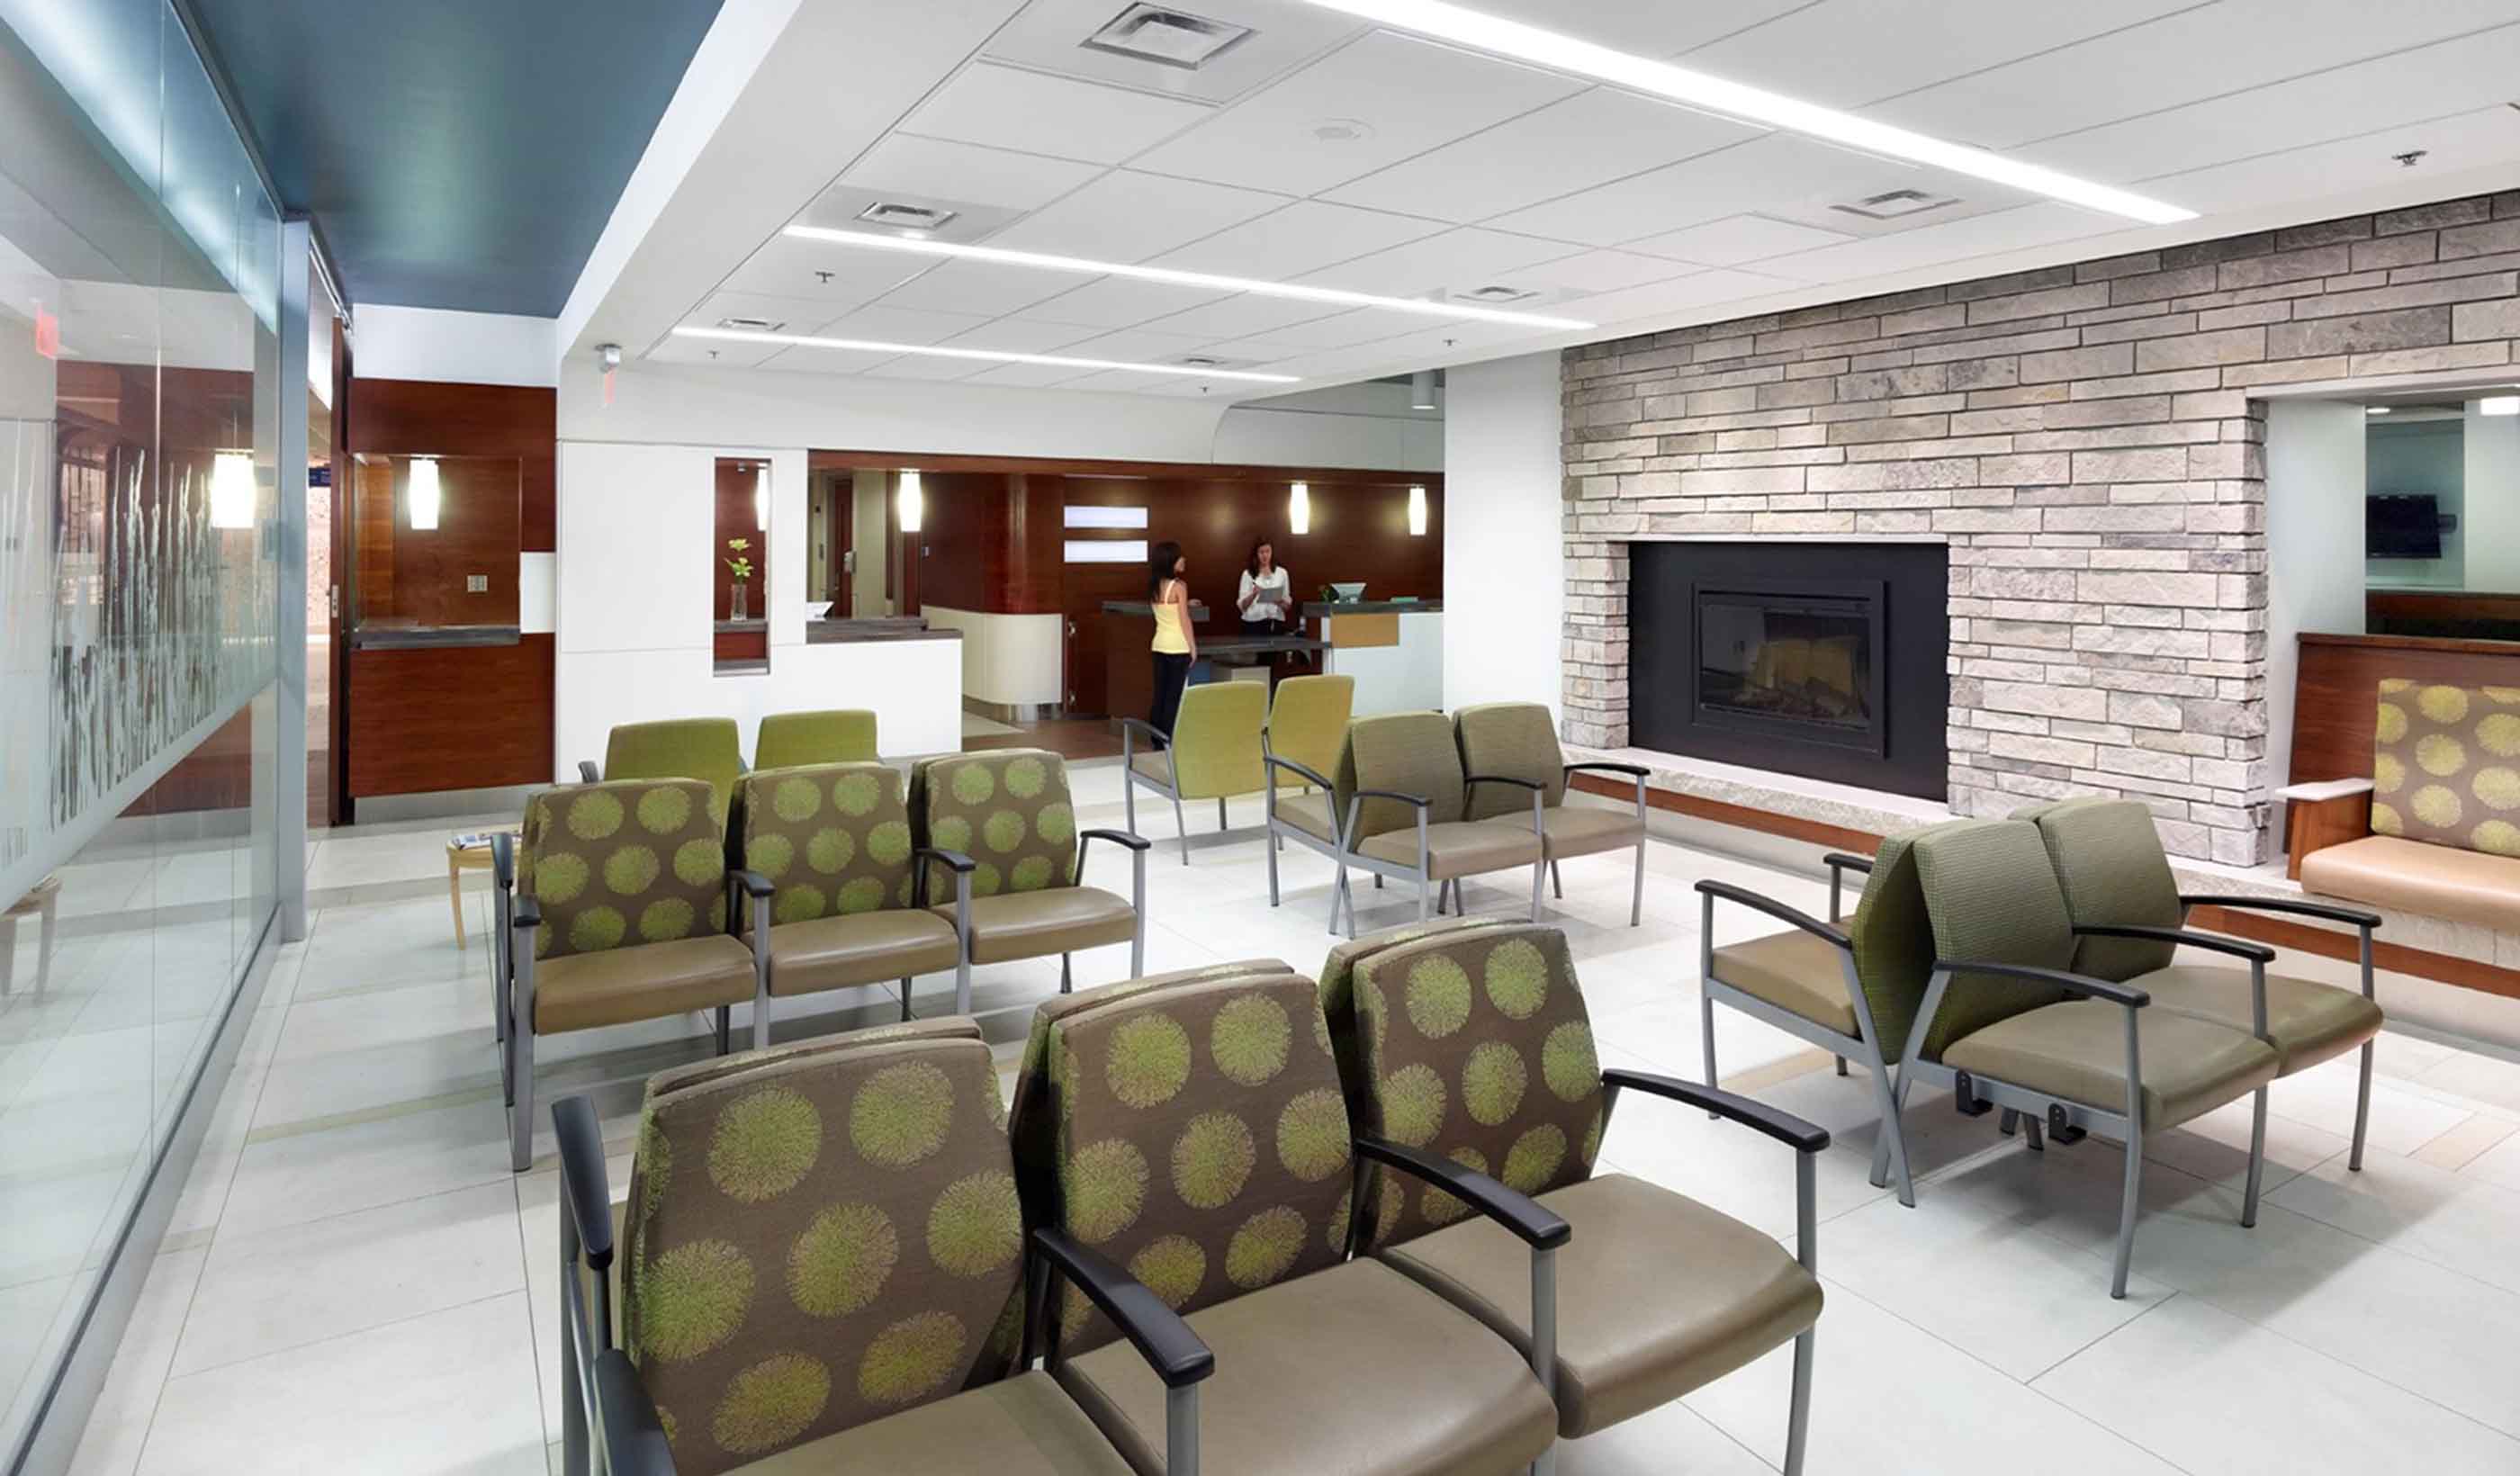 5 ways to make healthcare waiting rooms more functional and comfortable